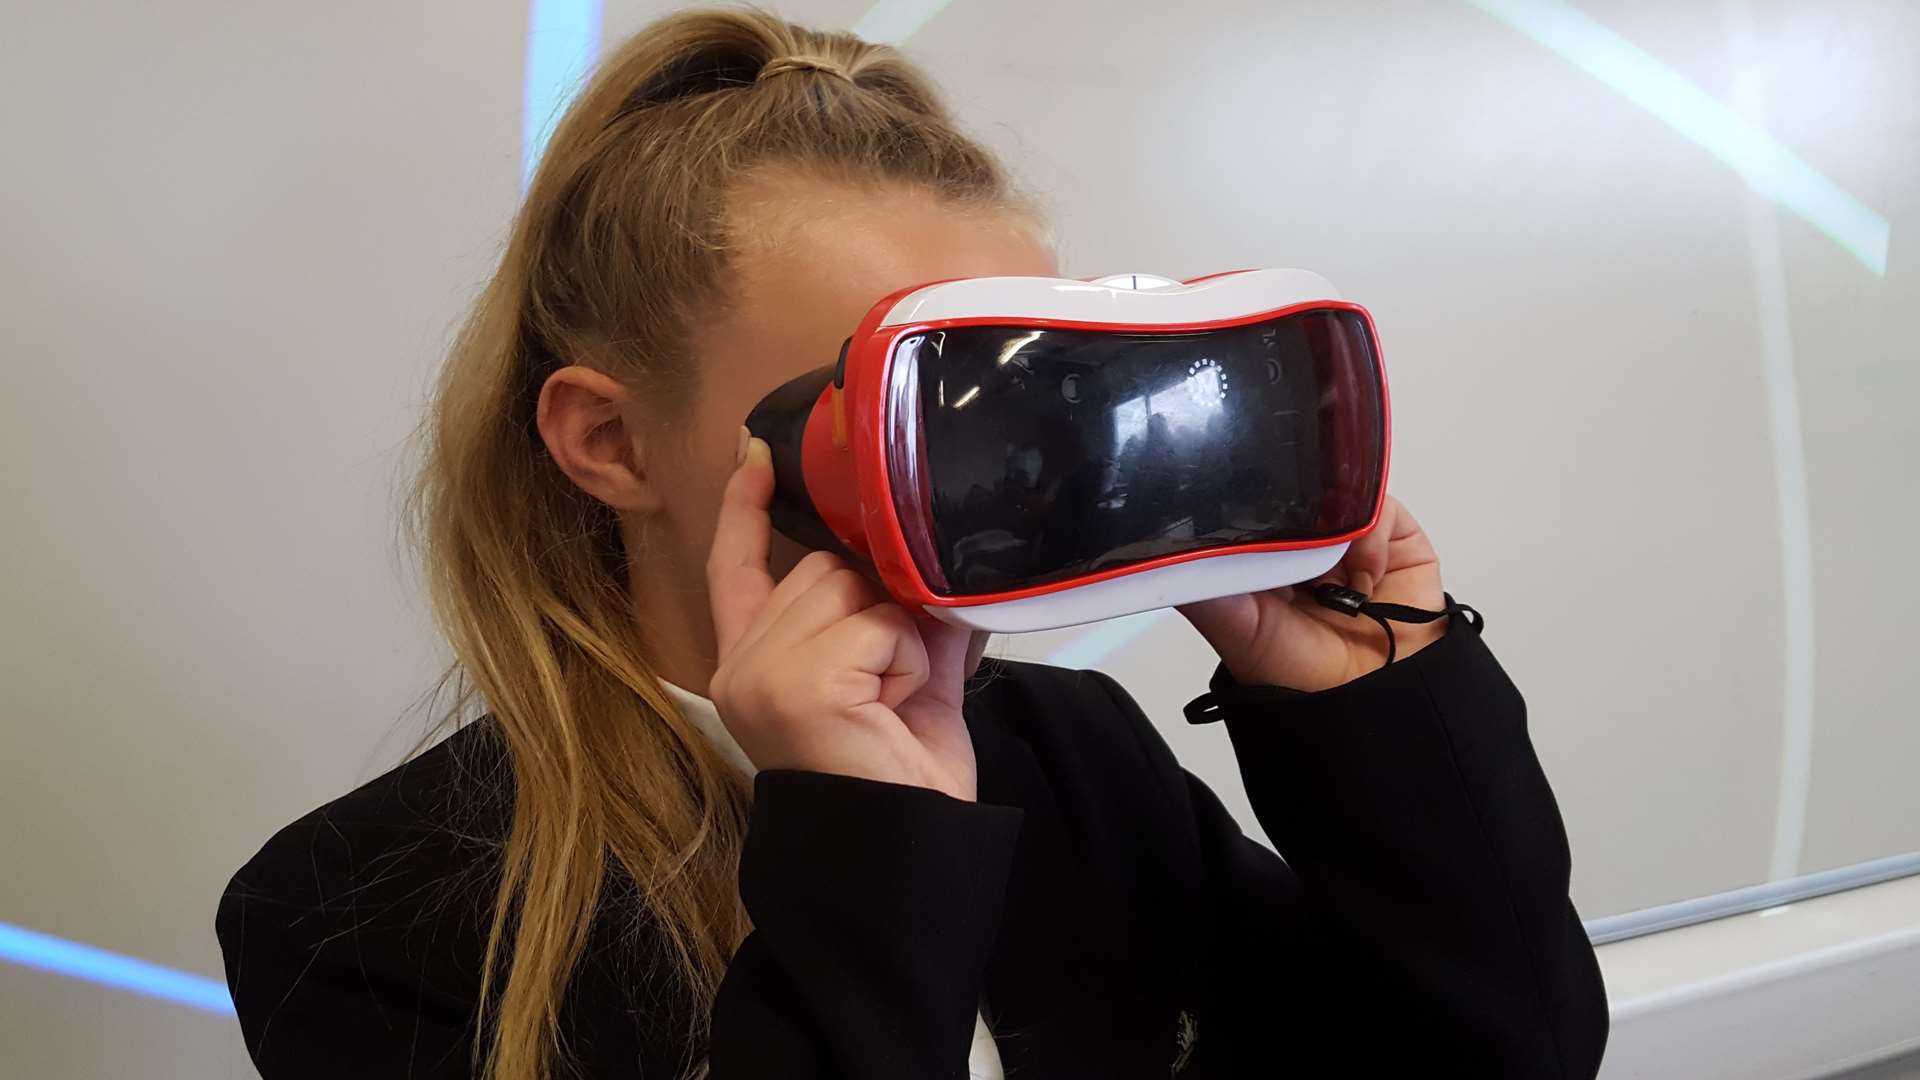 Erin Northover, 11, uses the virtual reality goggles look at images of skin cells while her teacher is discussing them